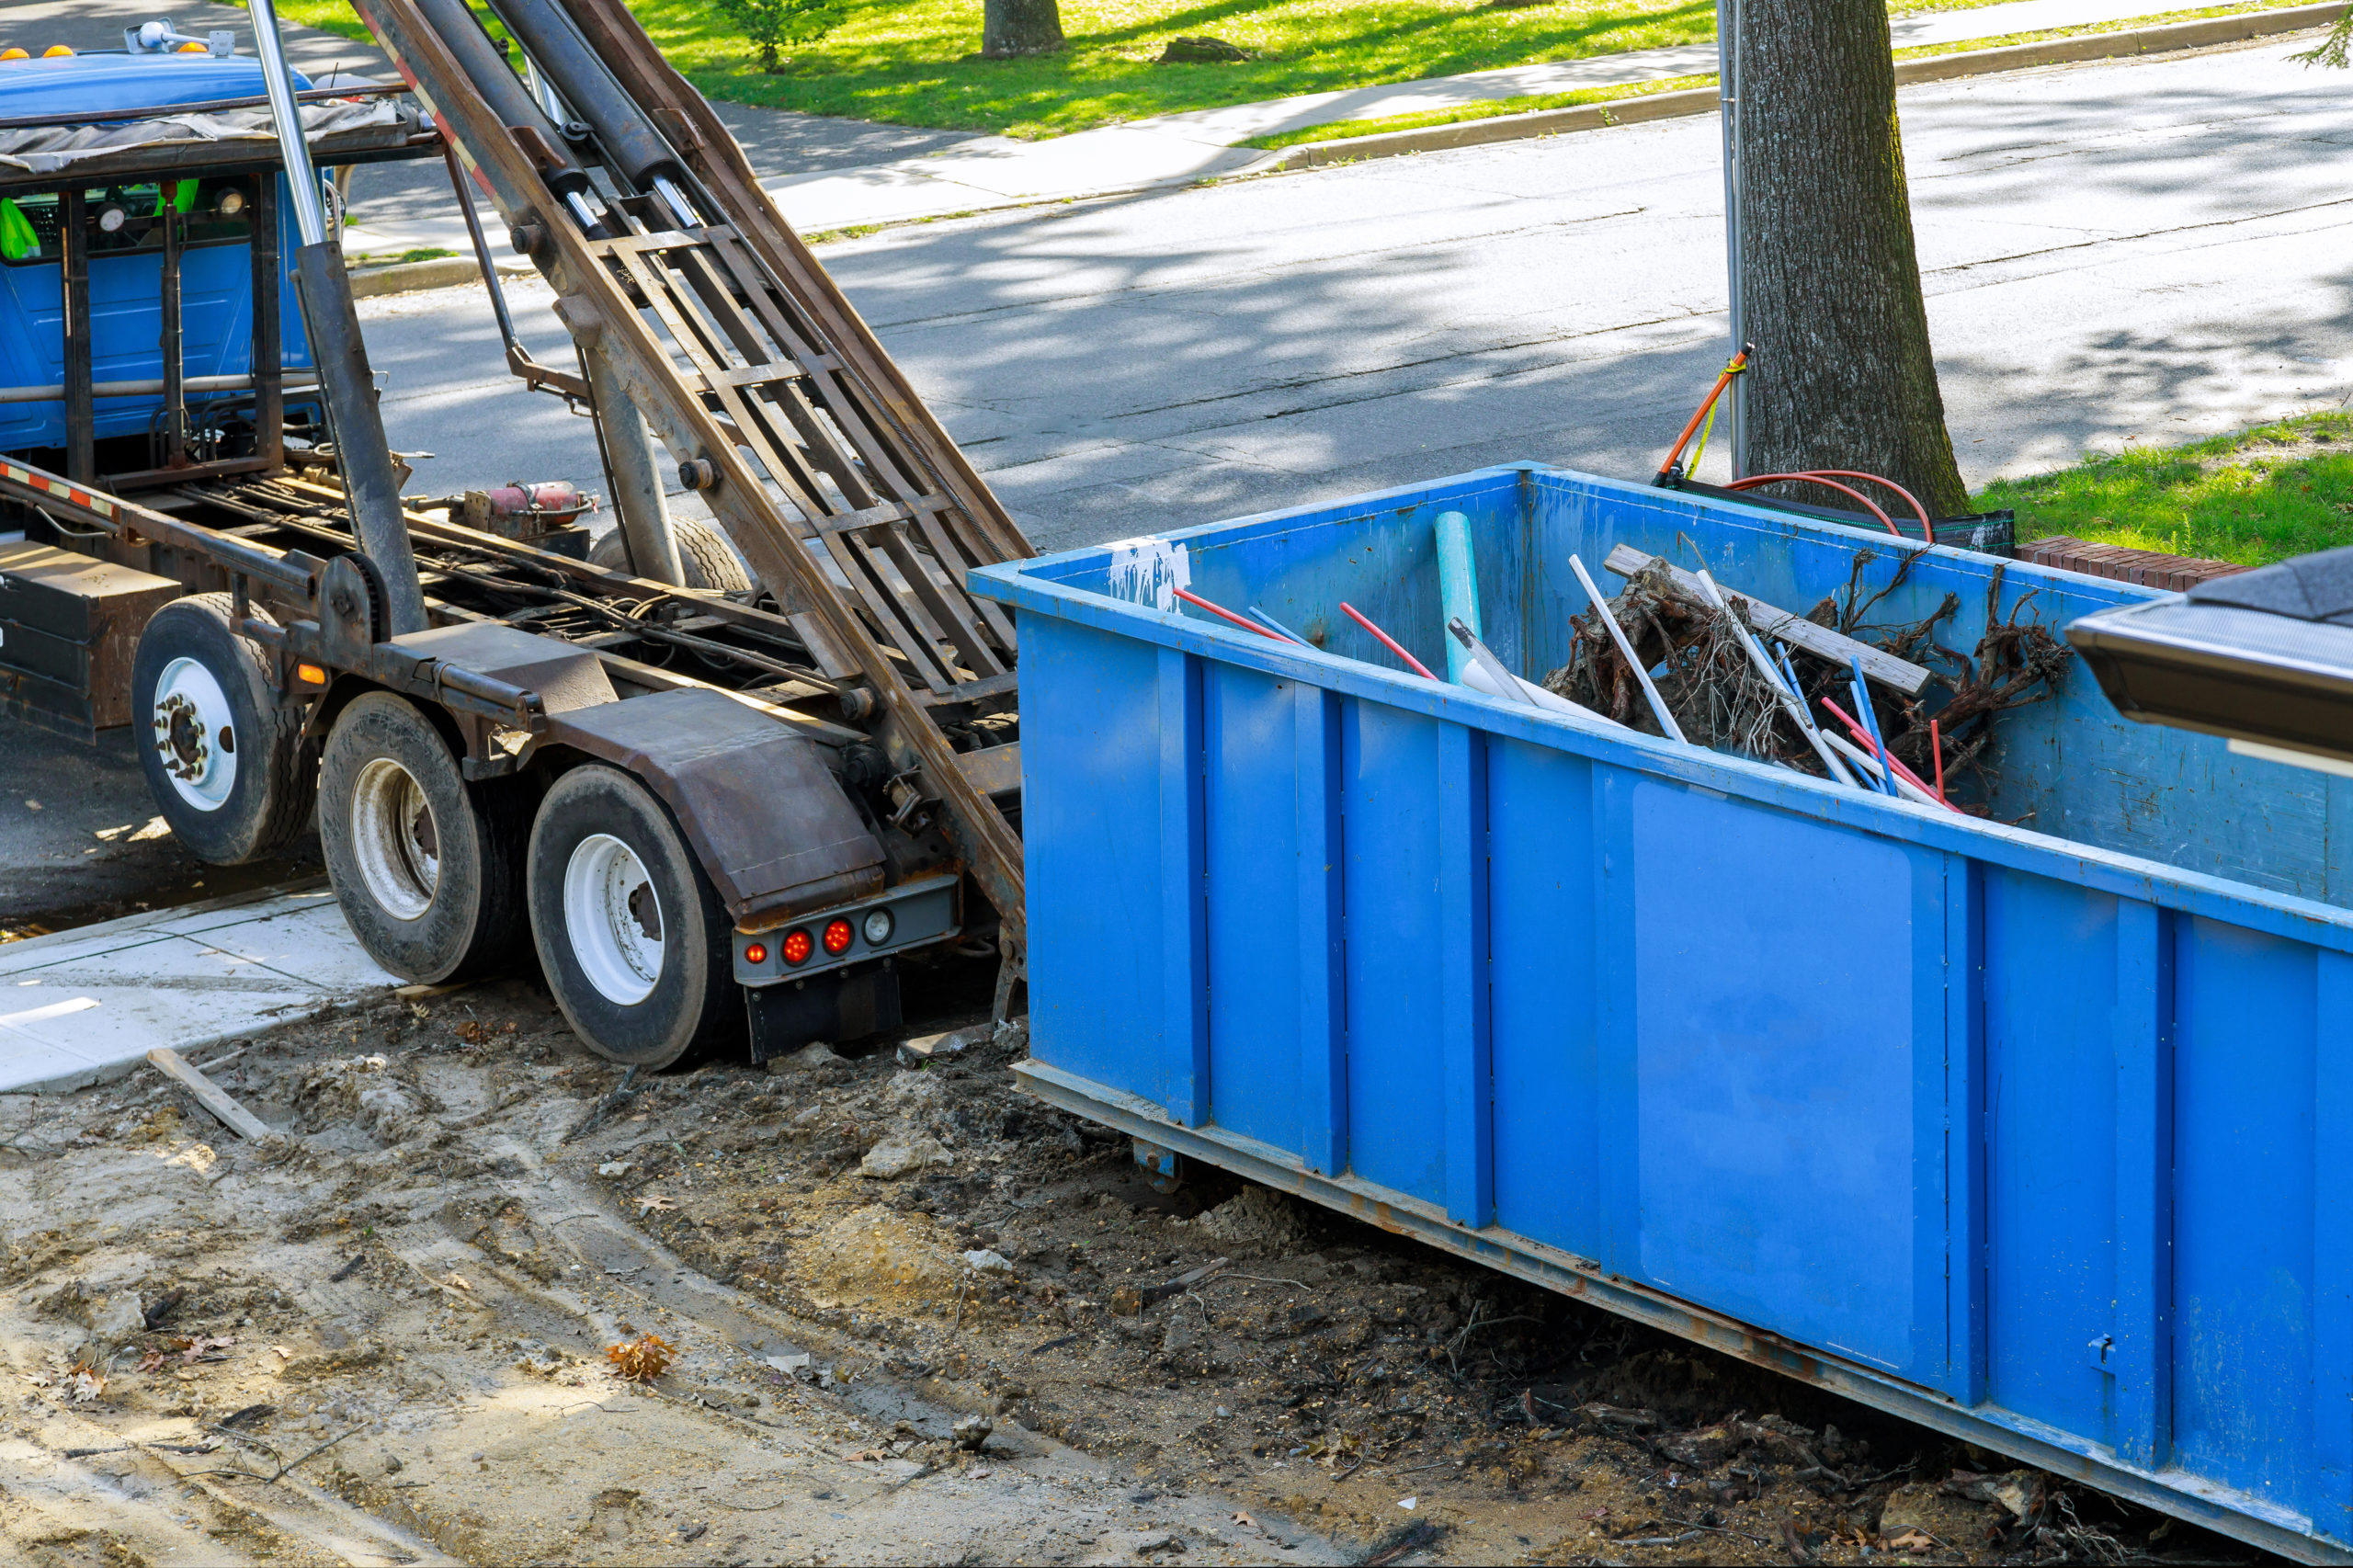 Planning Ahead: Dumpster Rentals for Extended Use